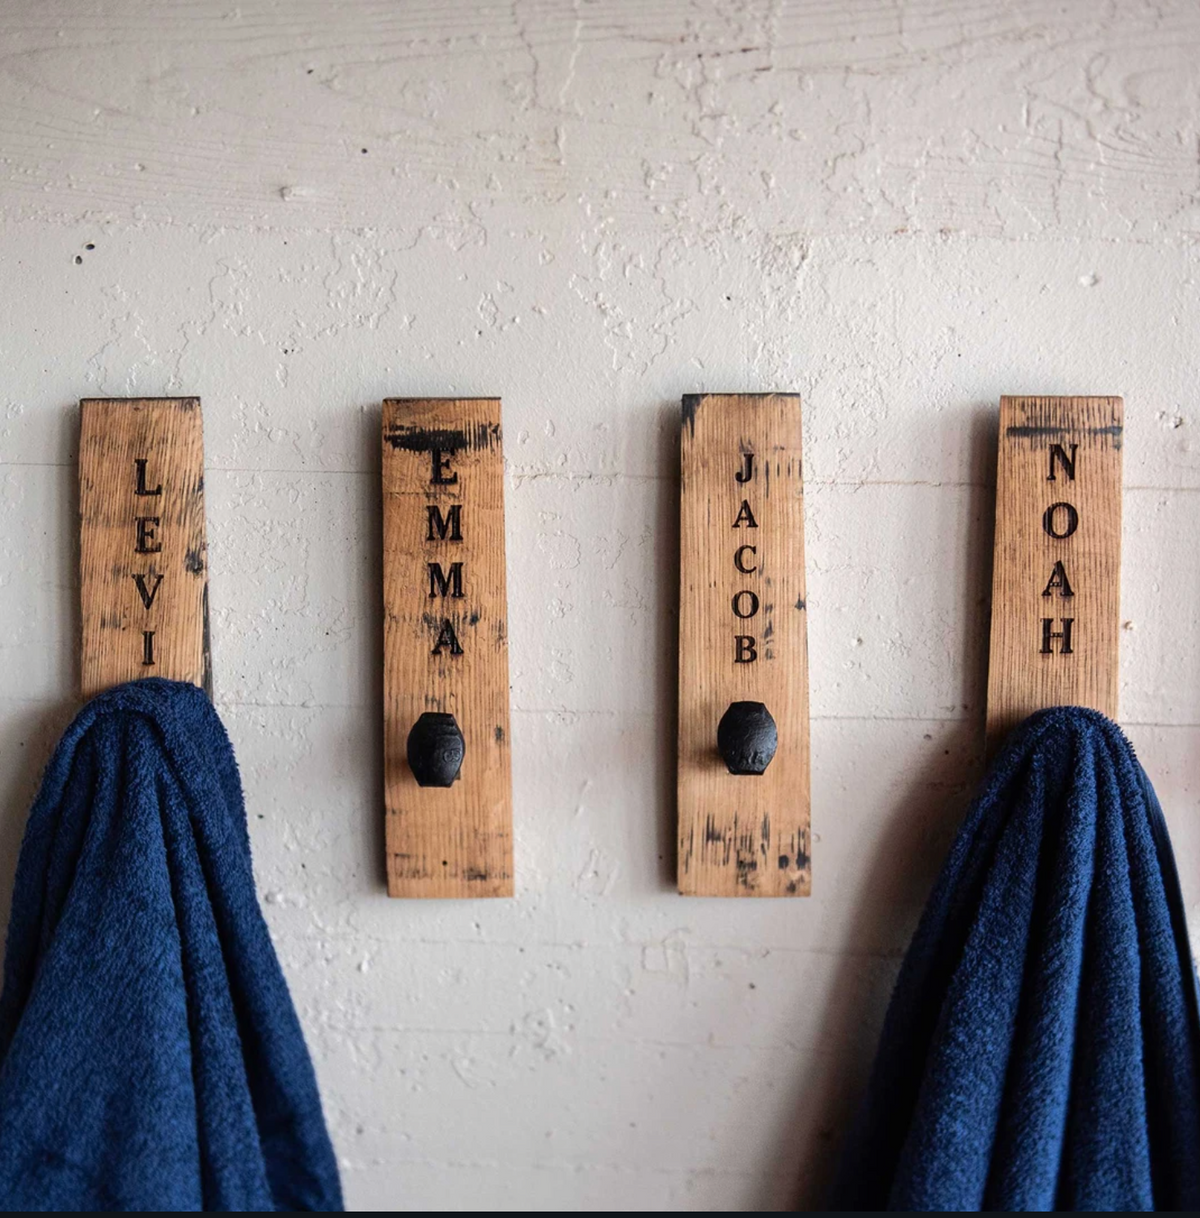 Tennessee Whiskey Barrel Stave Towel Hanger Wall Hooks